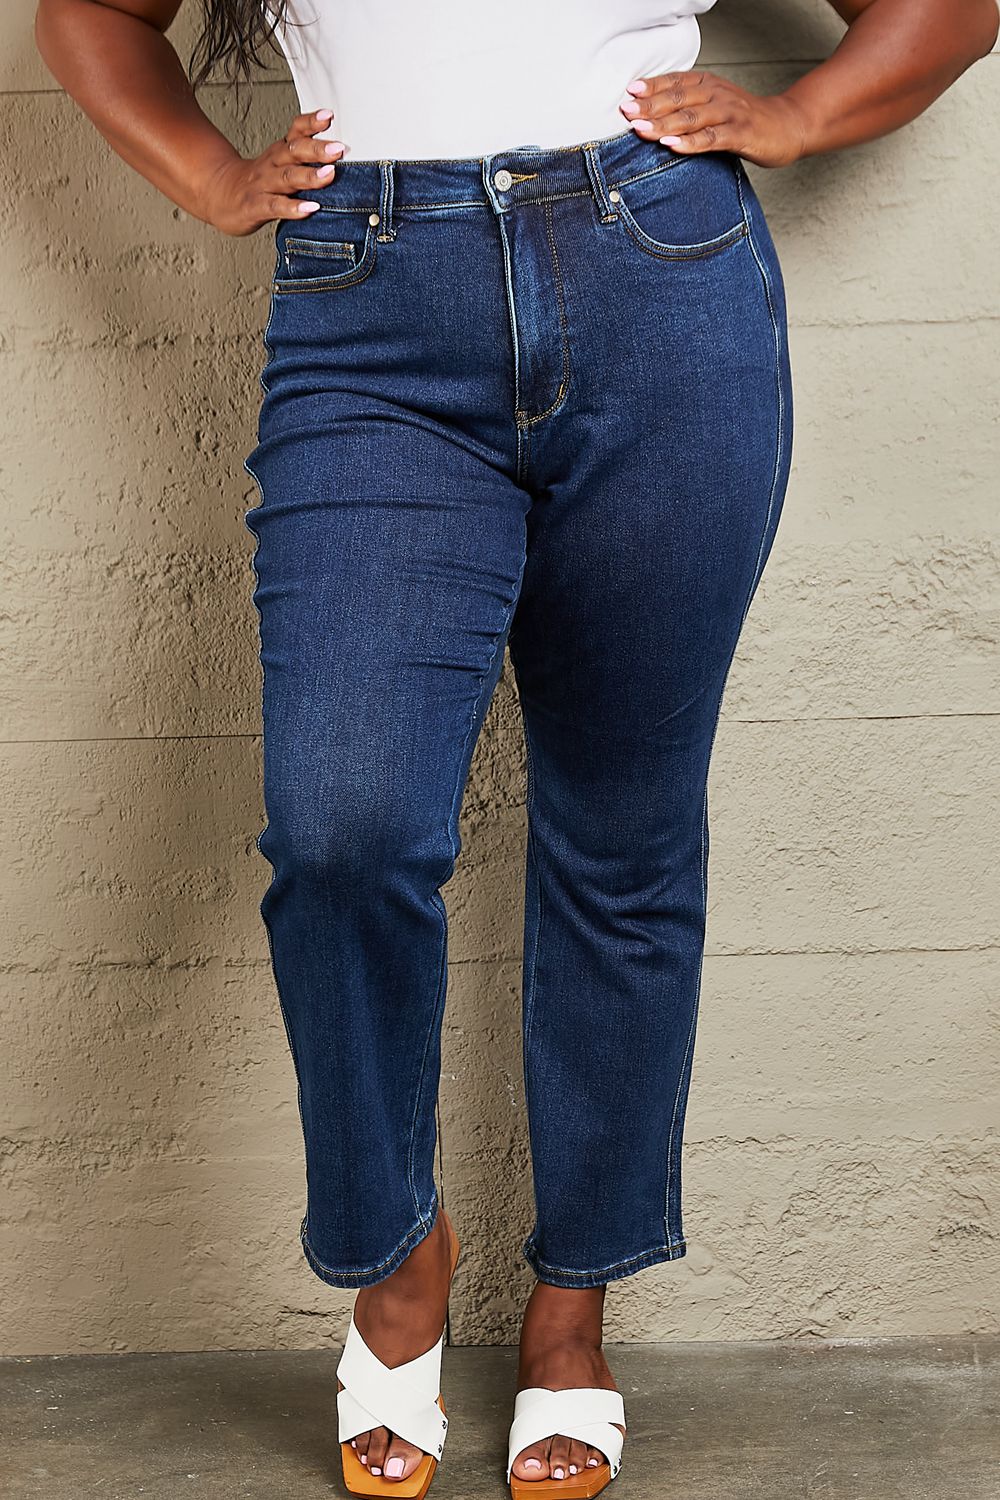 Plus Size Jeans Women's Casual Wear Collection 